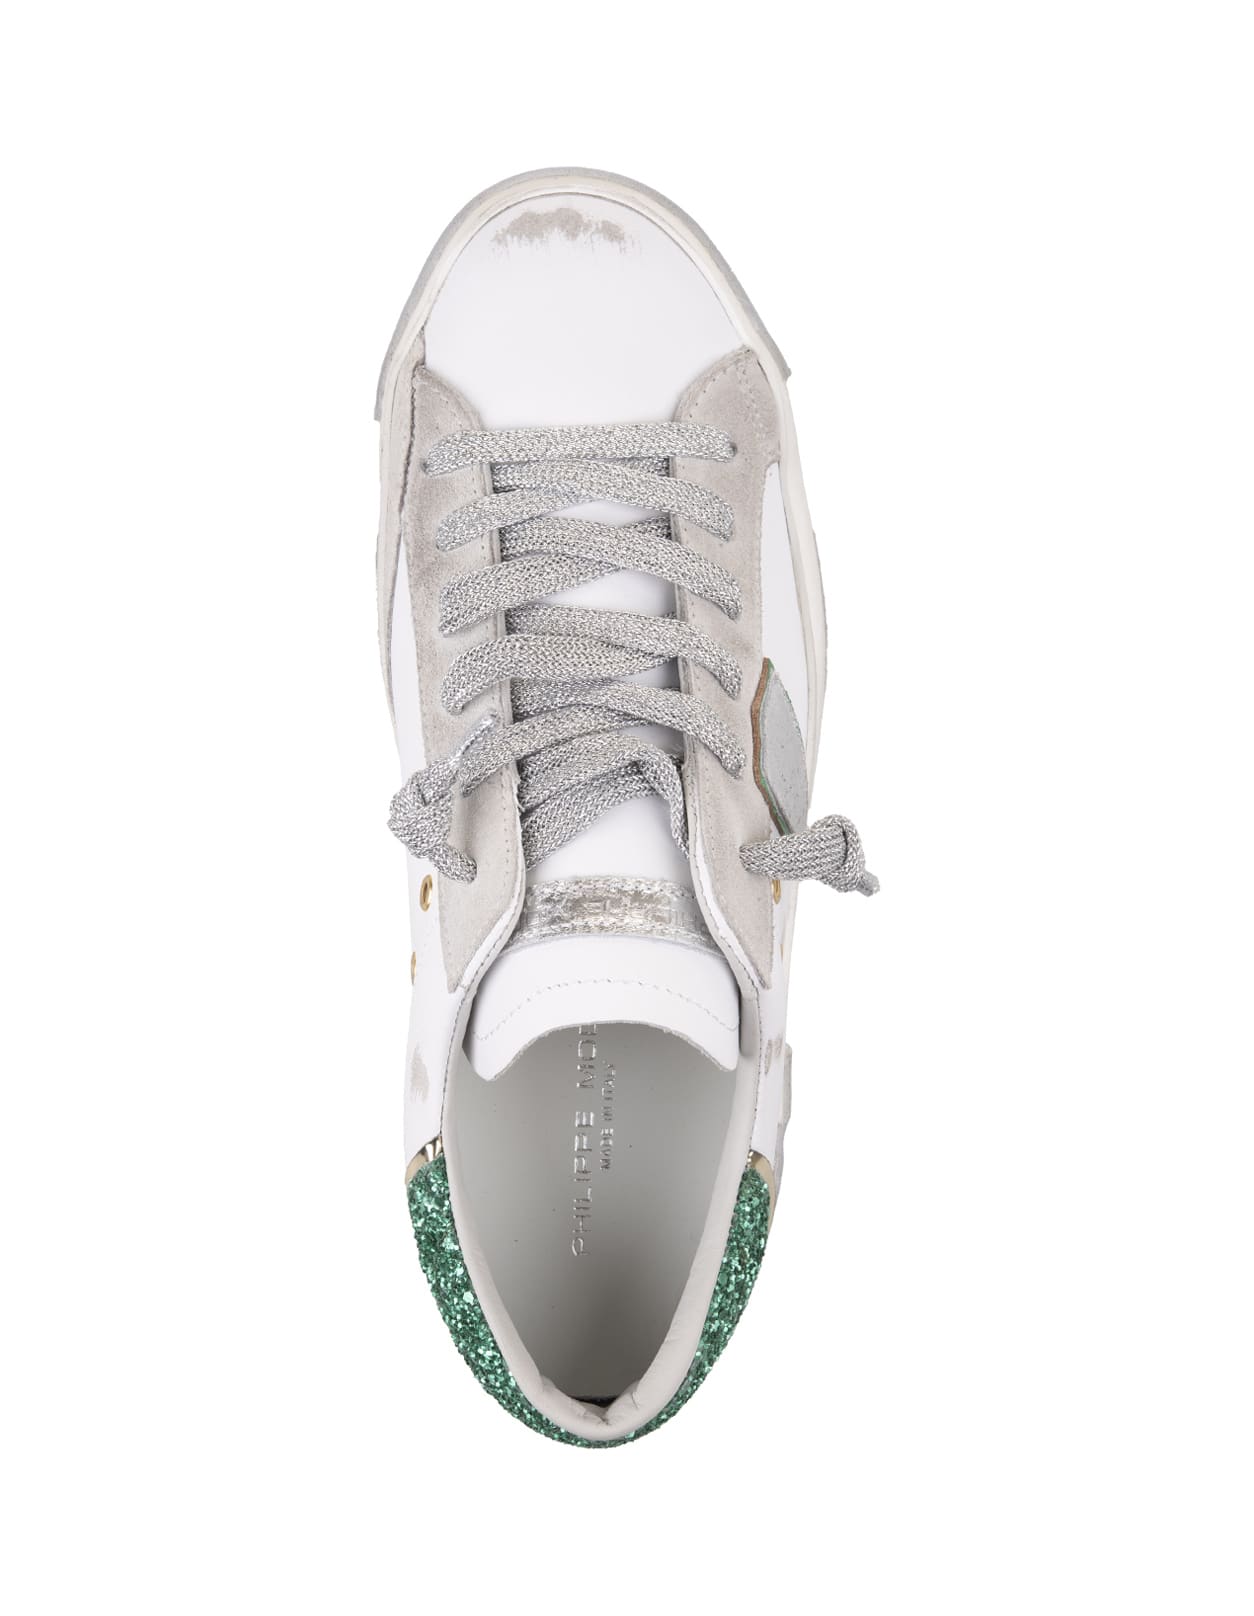 Shop Philippe Model Prsx Low Sneakers - White And Green